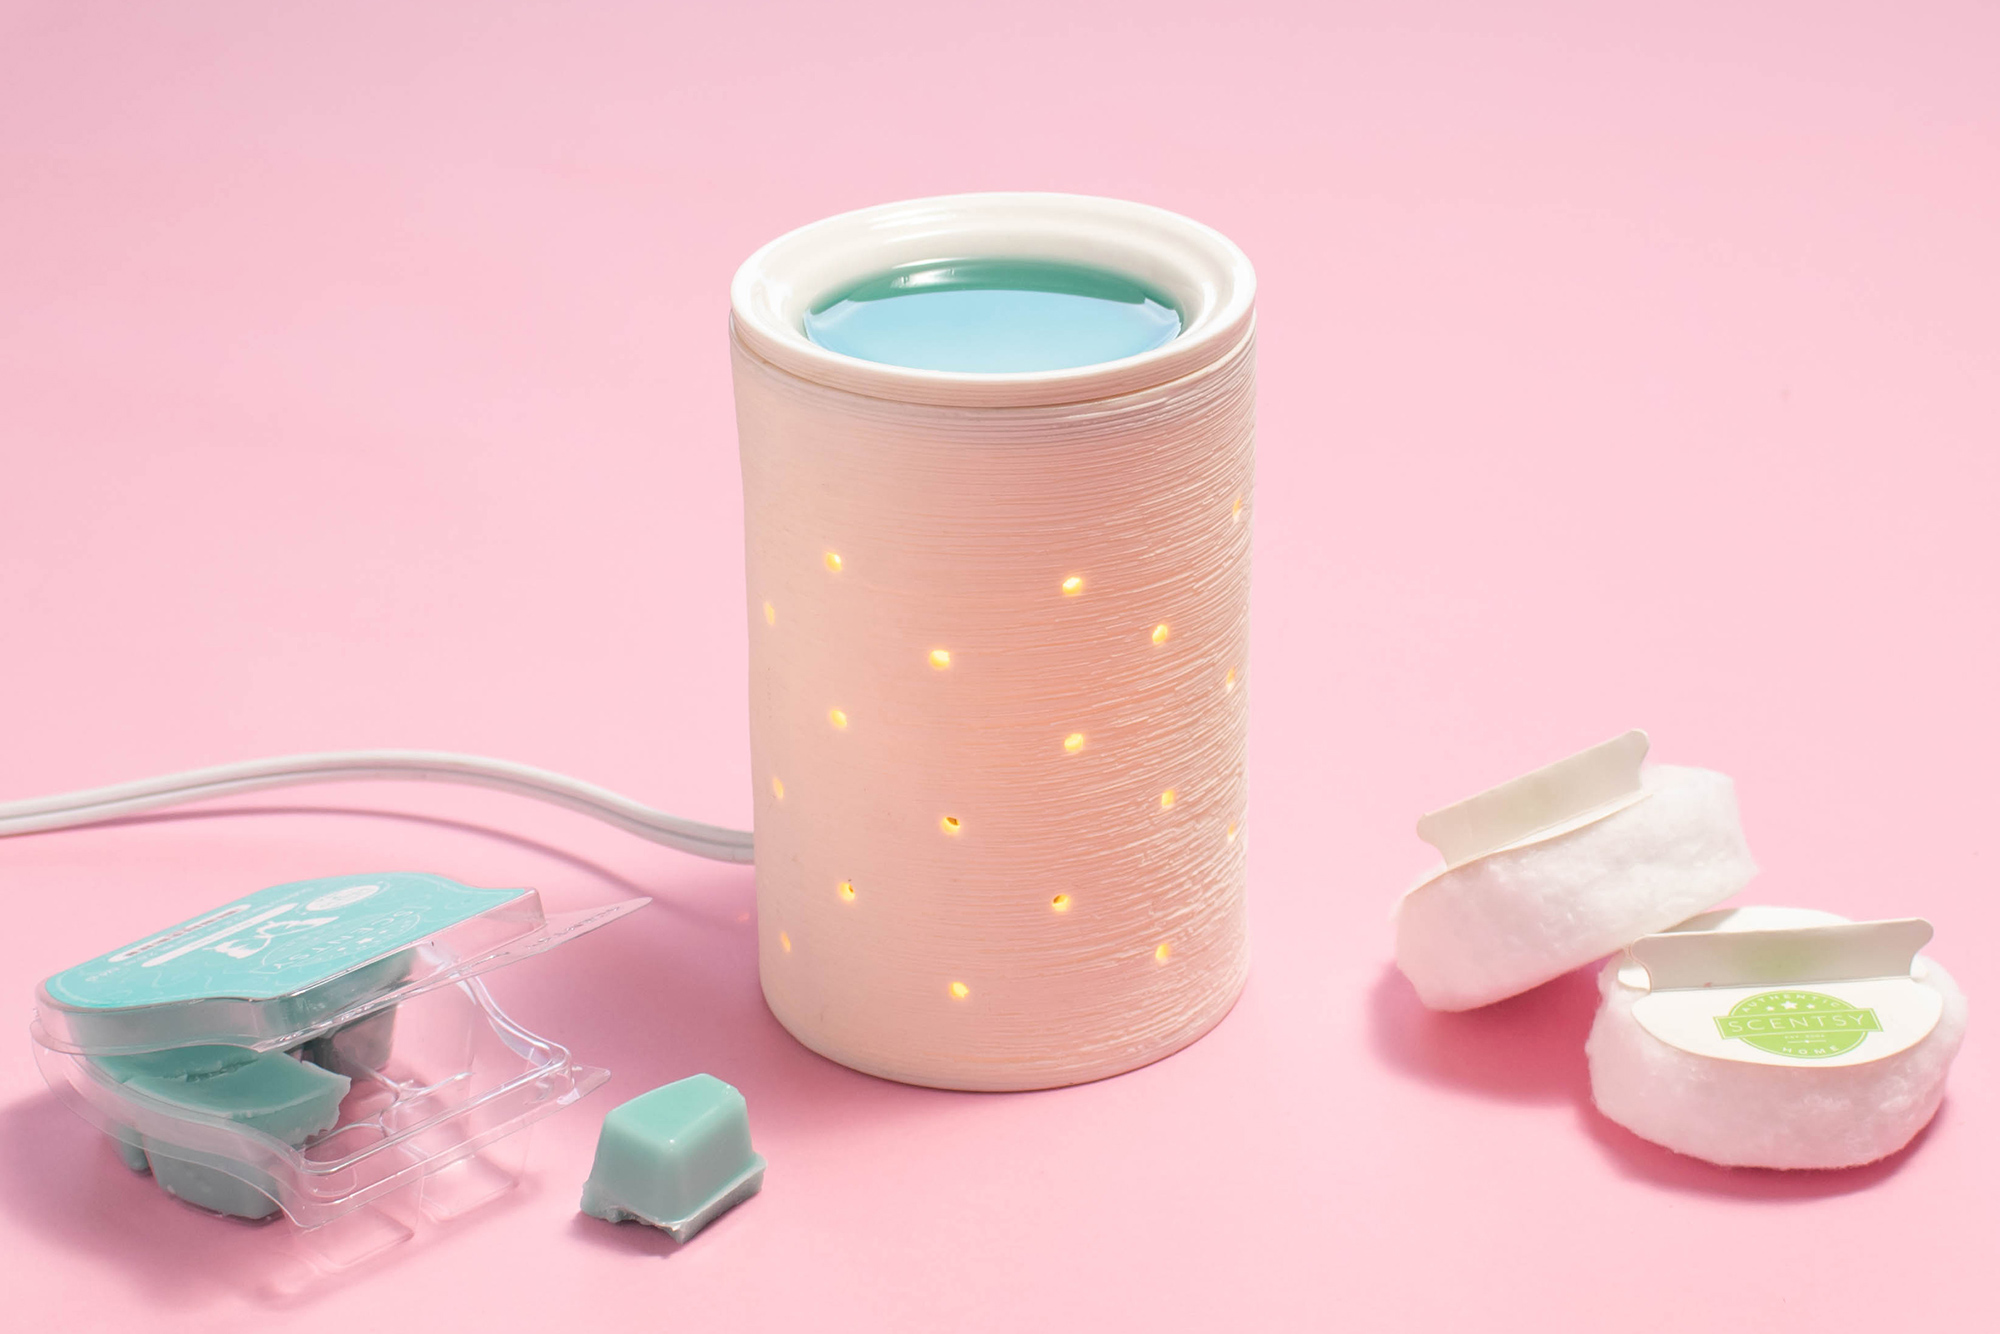 What’s the best way to use Scentsy wax?